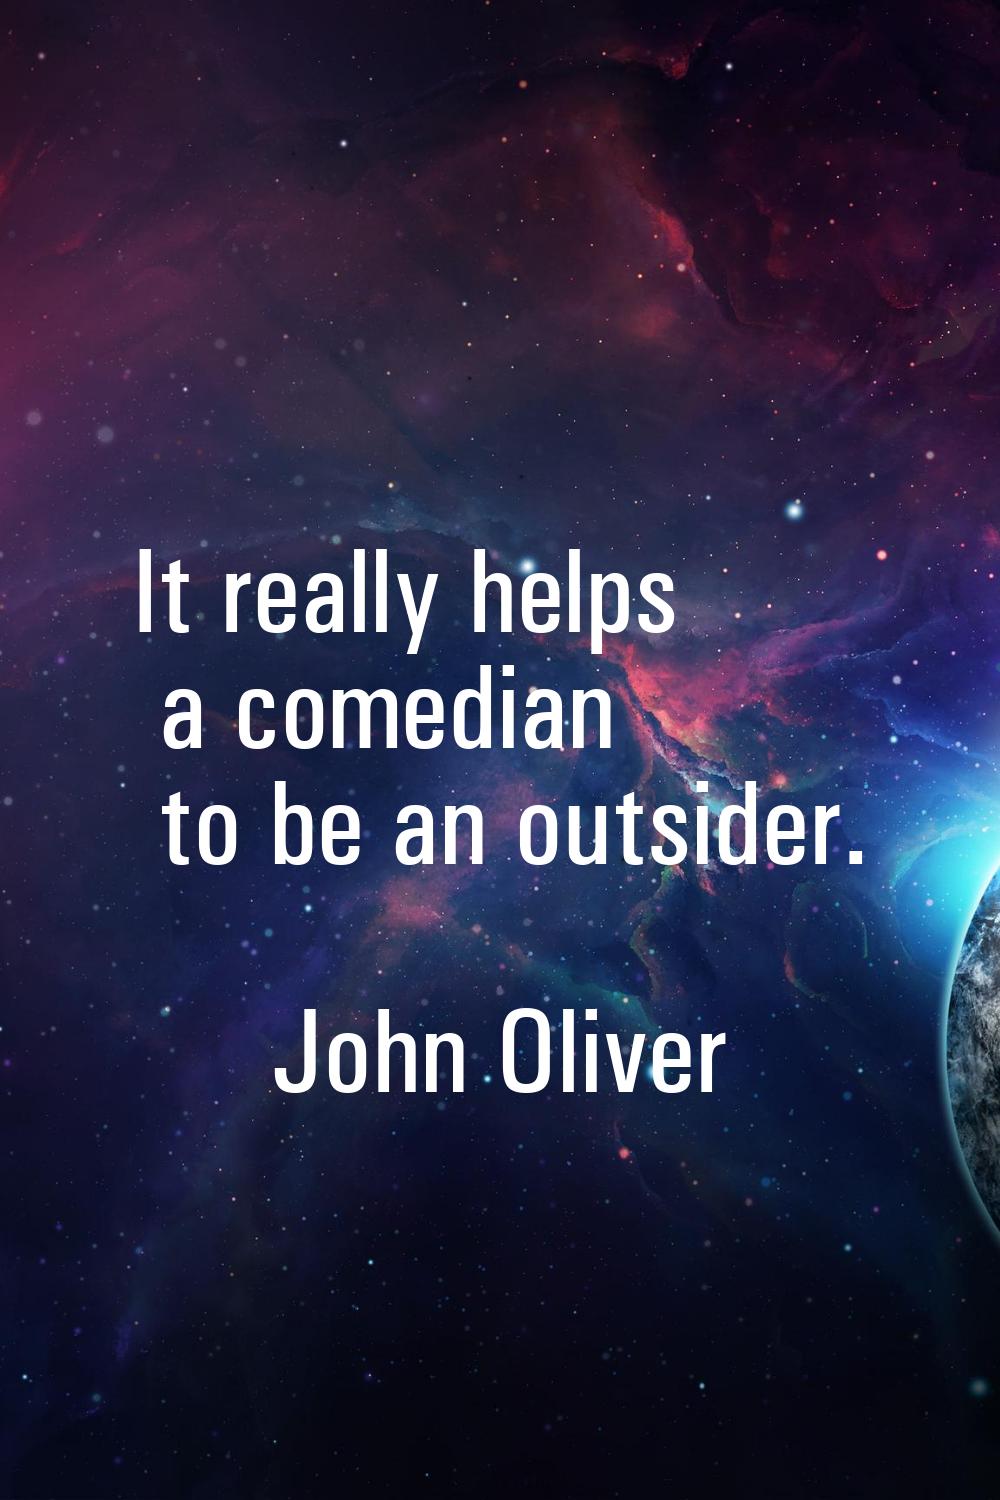 It really helps a comedian to be an outsider.